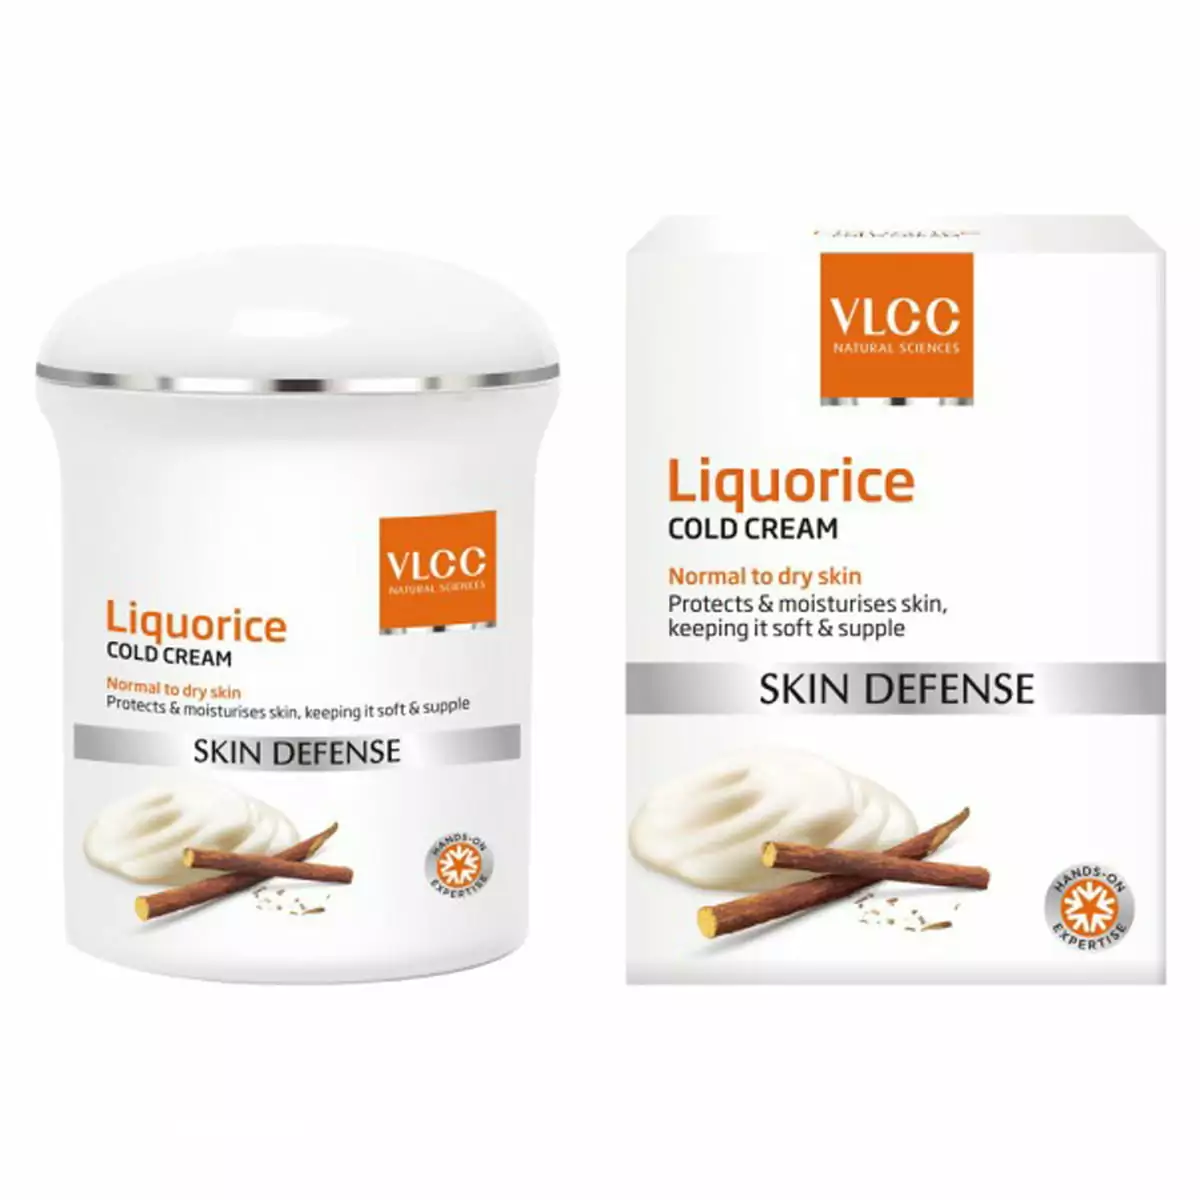 Liquorice Cold Cream by VLCC - Face Creams for Winter in India